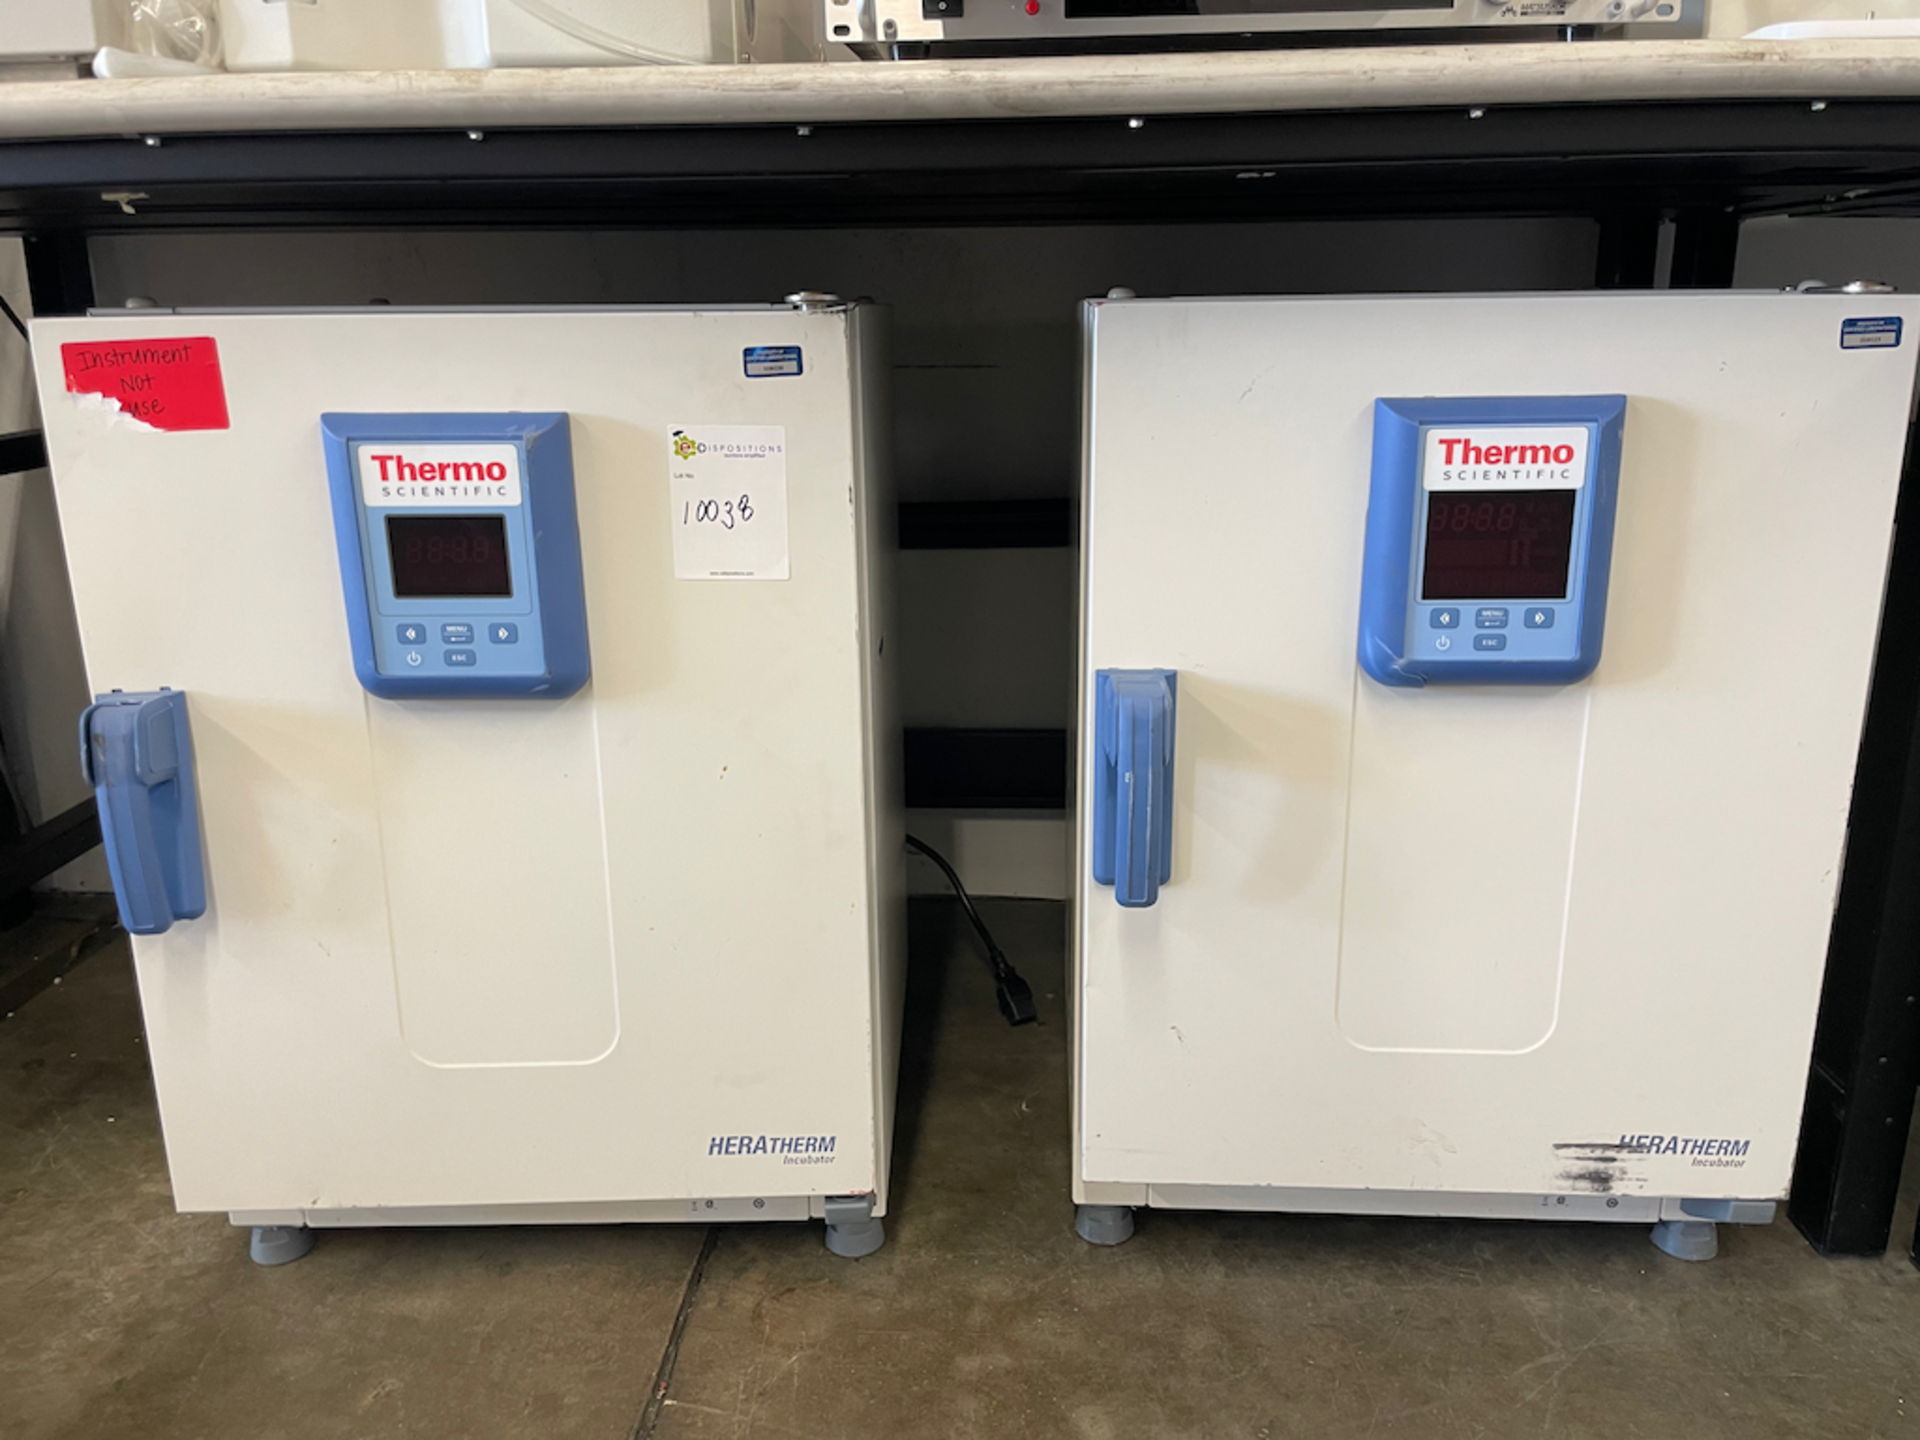 LOT OF QTY-2 THERMO SCIENTIFIC HERATHERM INCUBATOR - LOCATED AT 1218 ALDERWOOD AVE. SUNNYVALE, CA